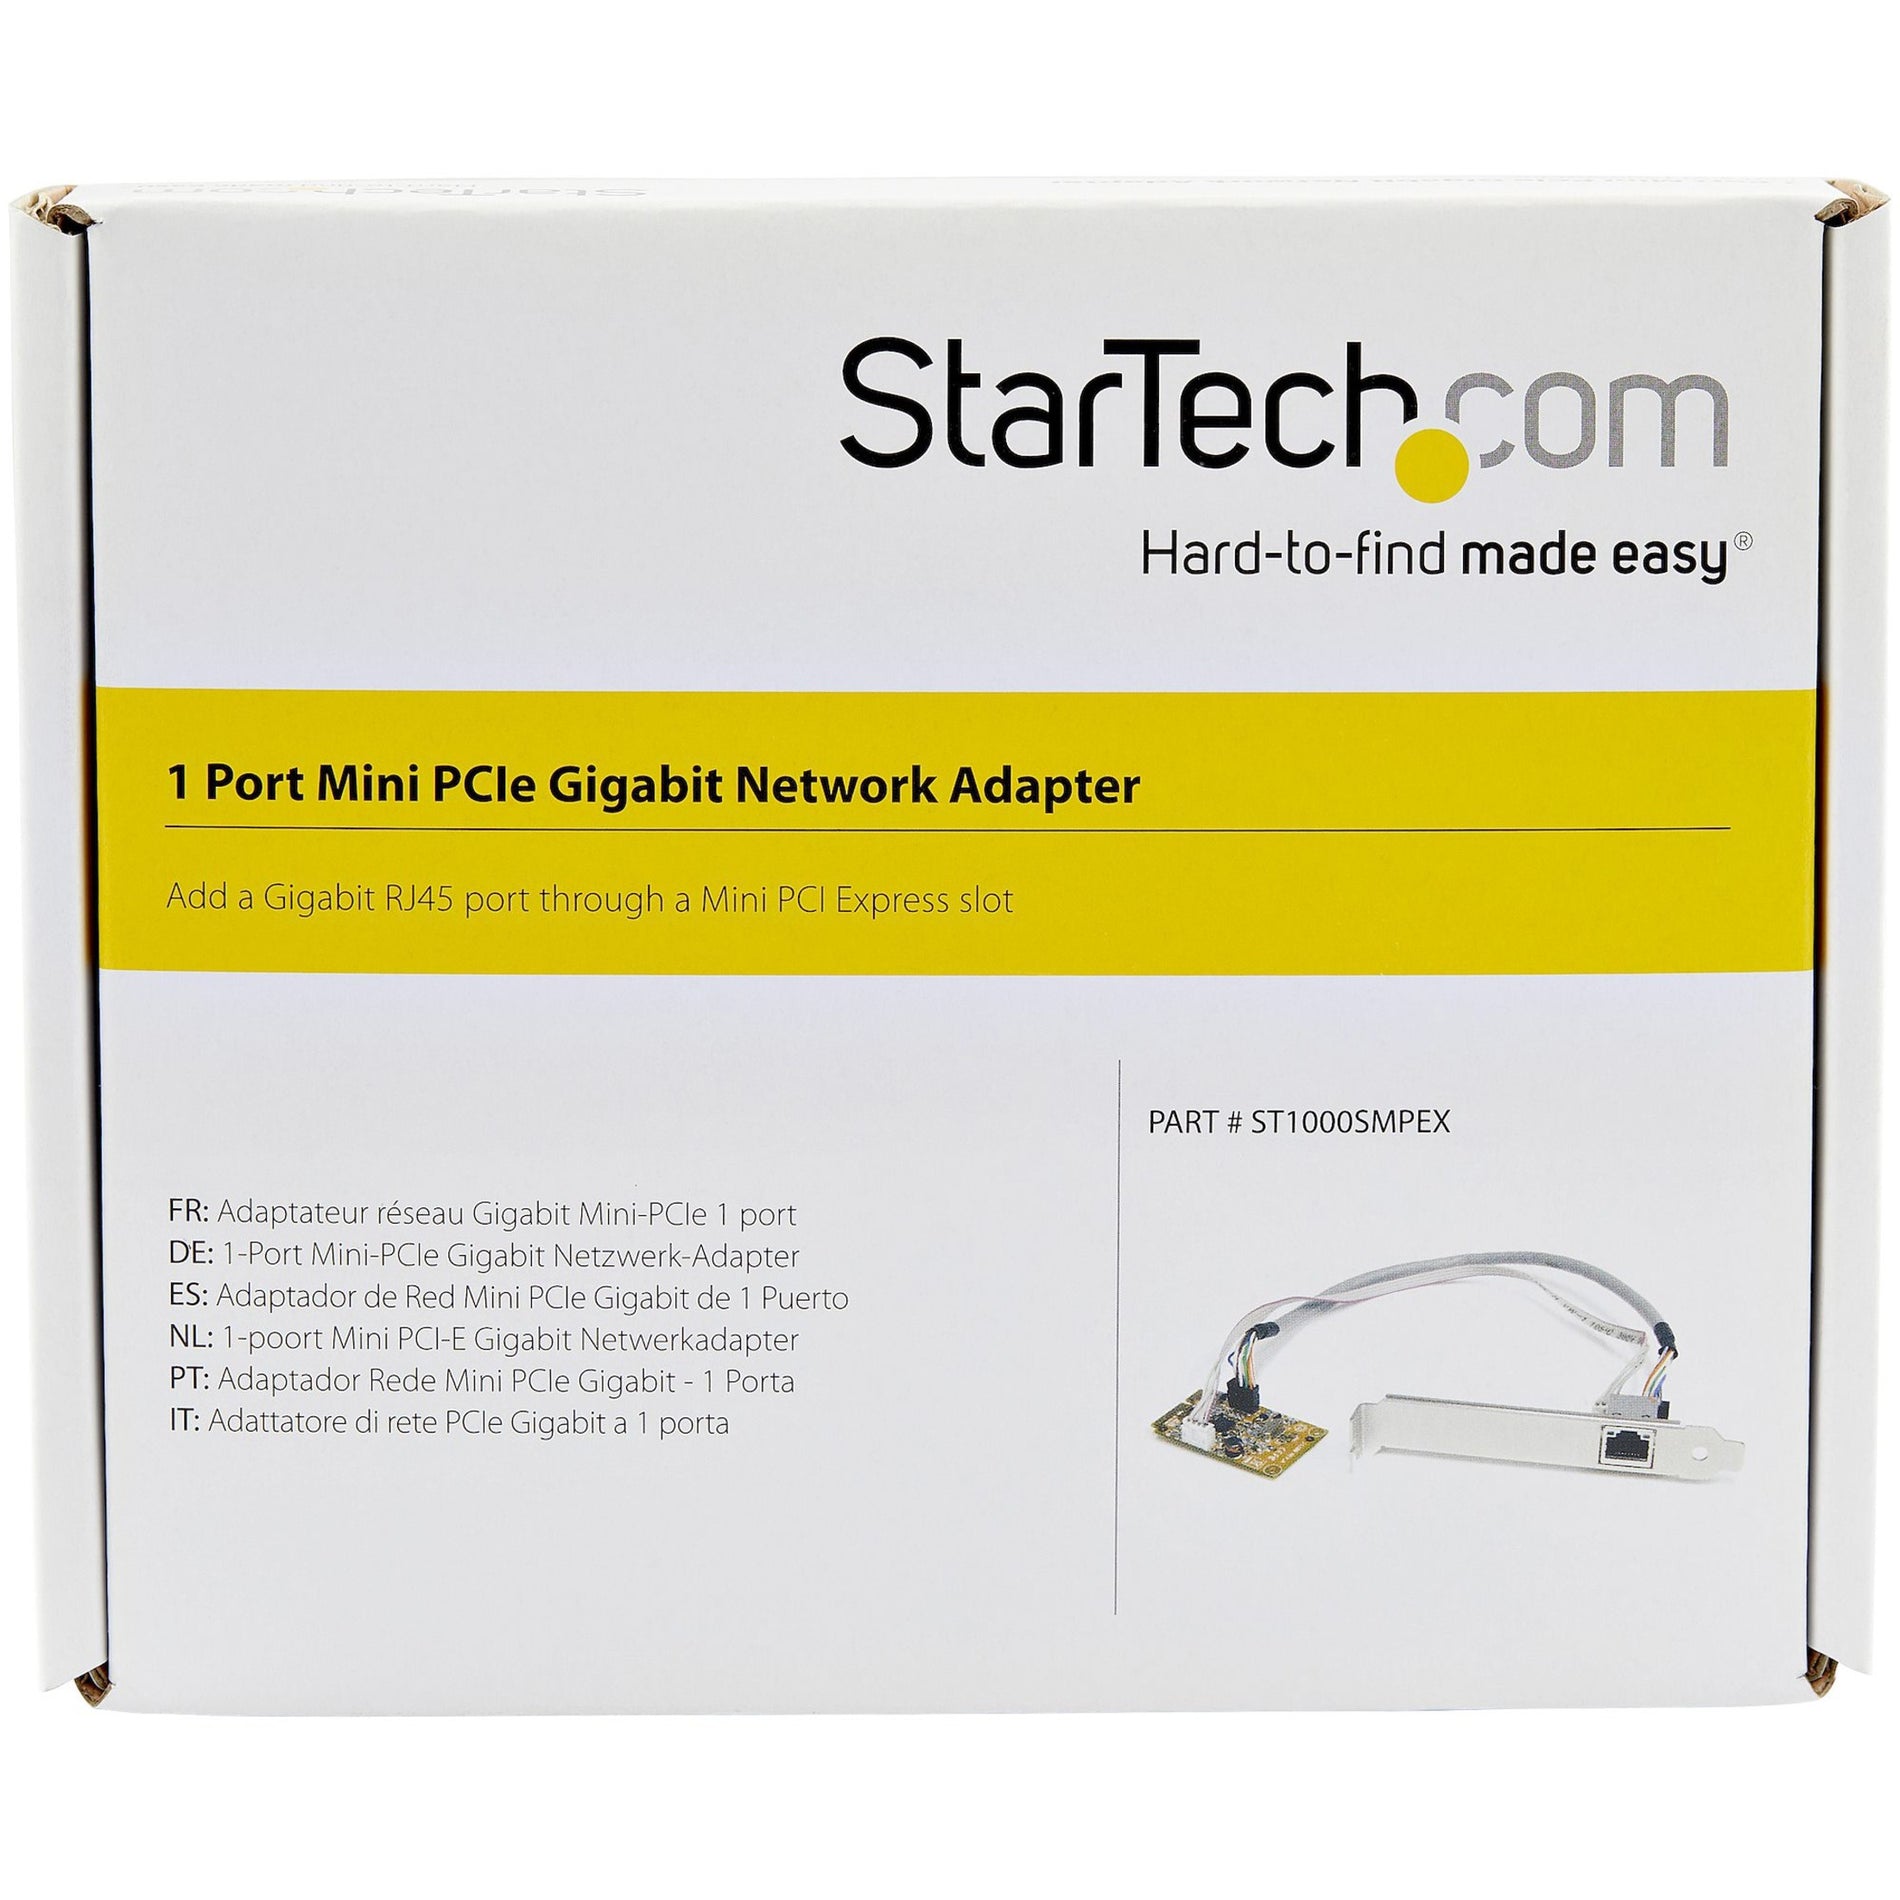 StarTech.com ST1000SMPEX Mini PCI Express Gigabit Ethernet Network Adapter NIC Card, High-Speed Internet Connection for Mini-ITX and Embedded Systems